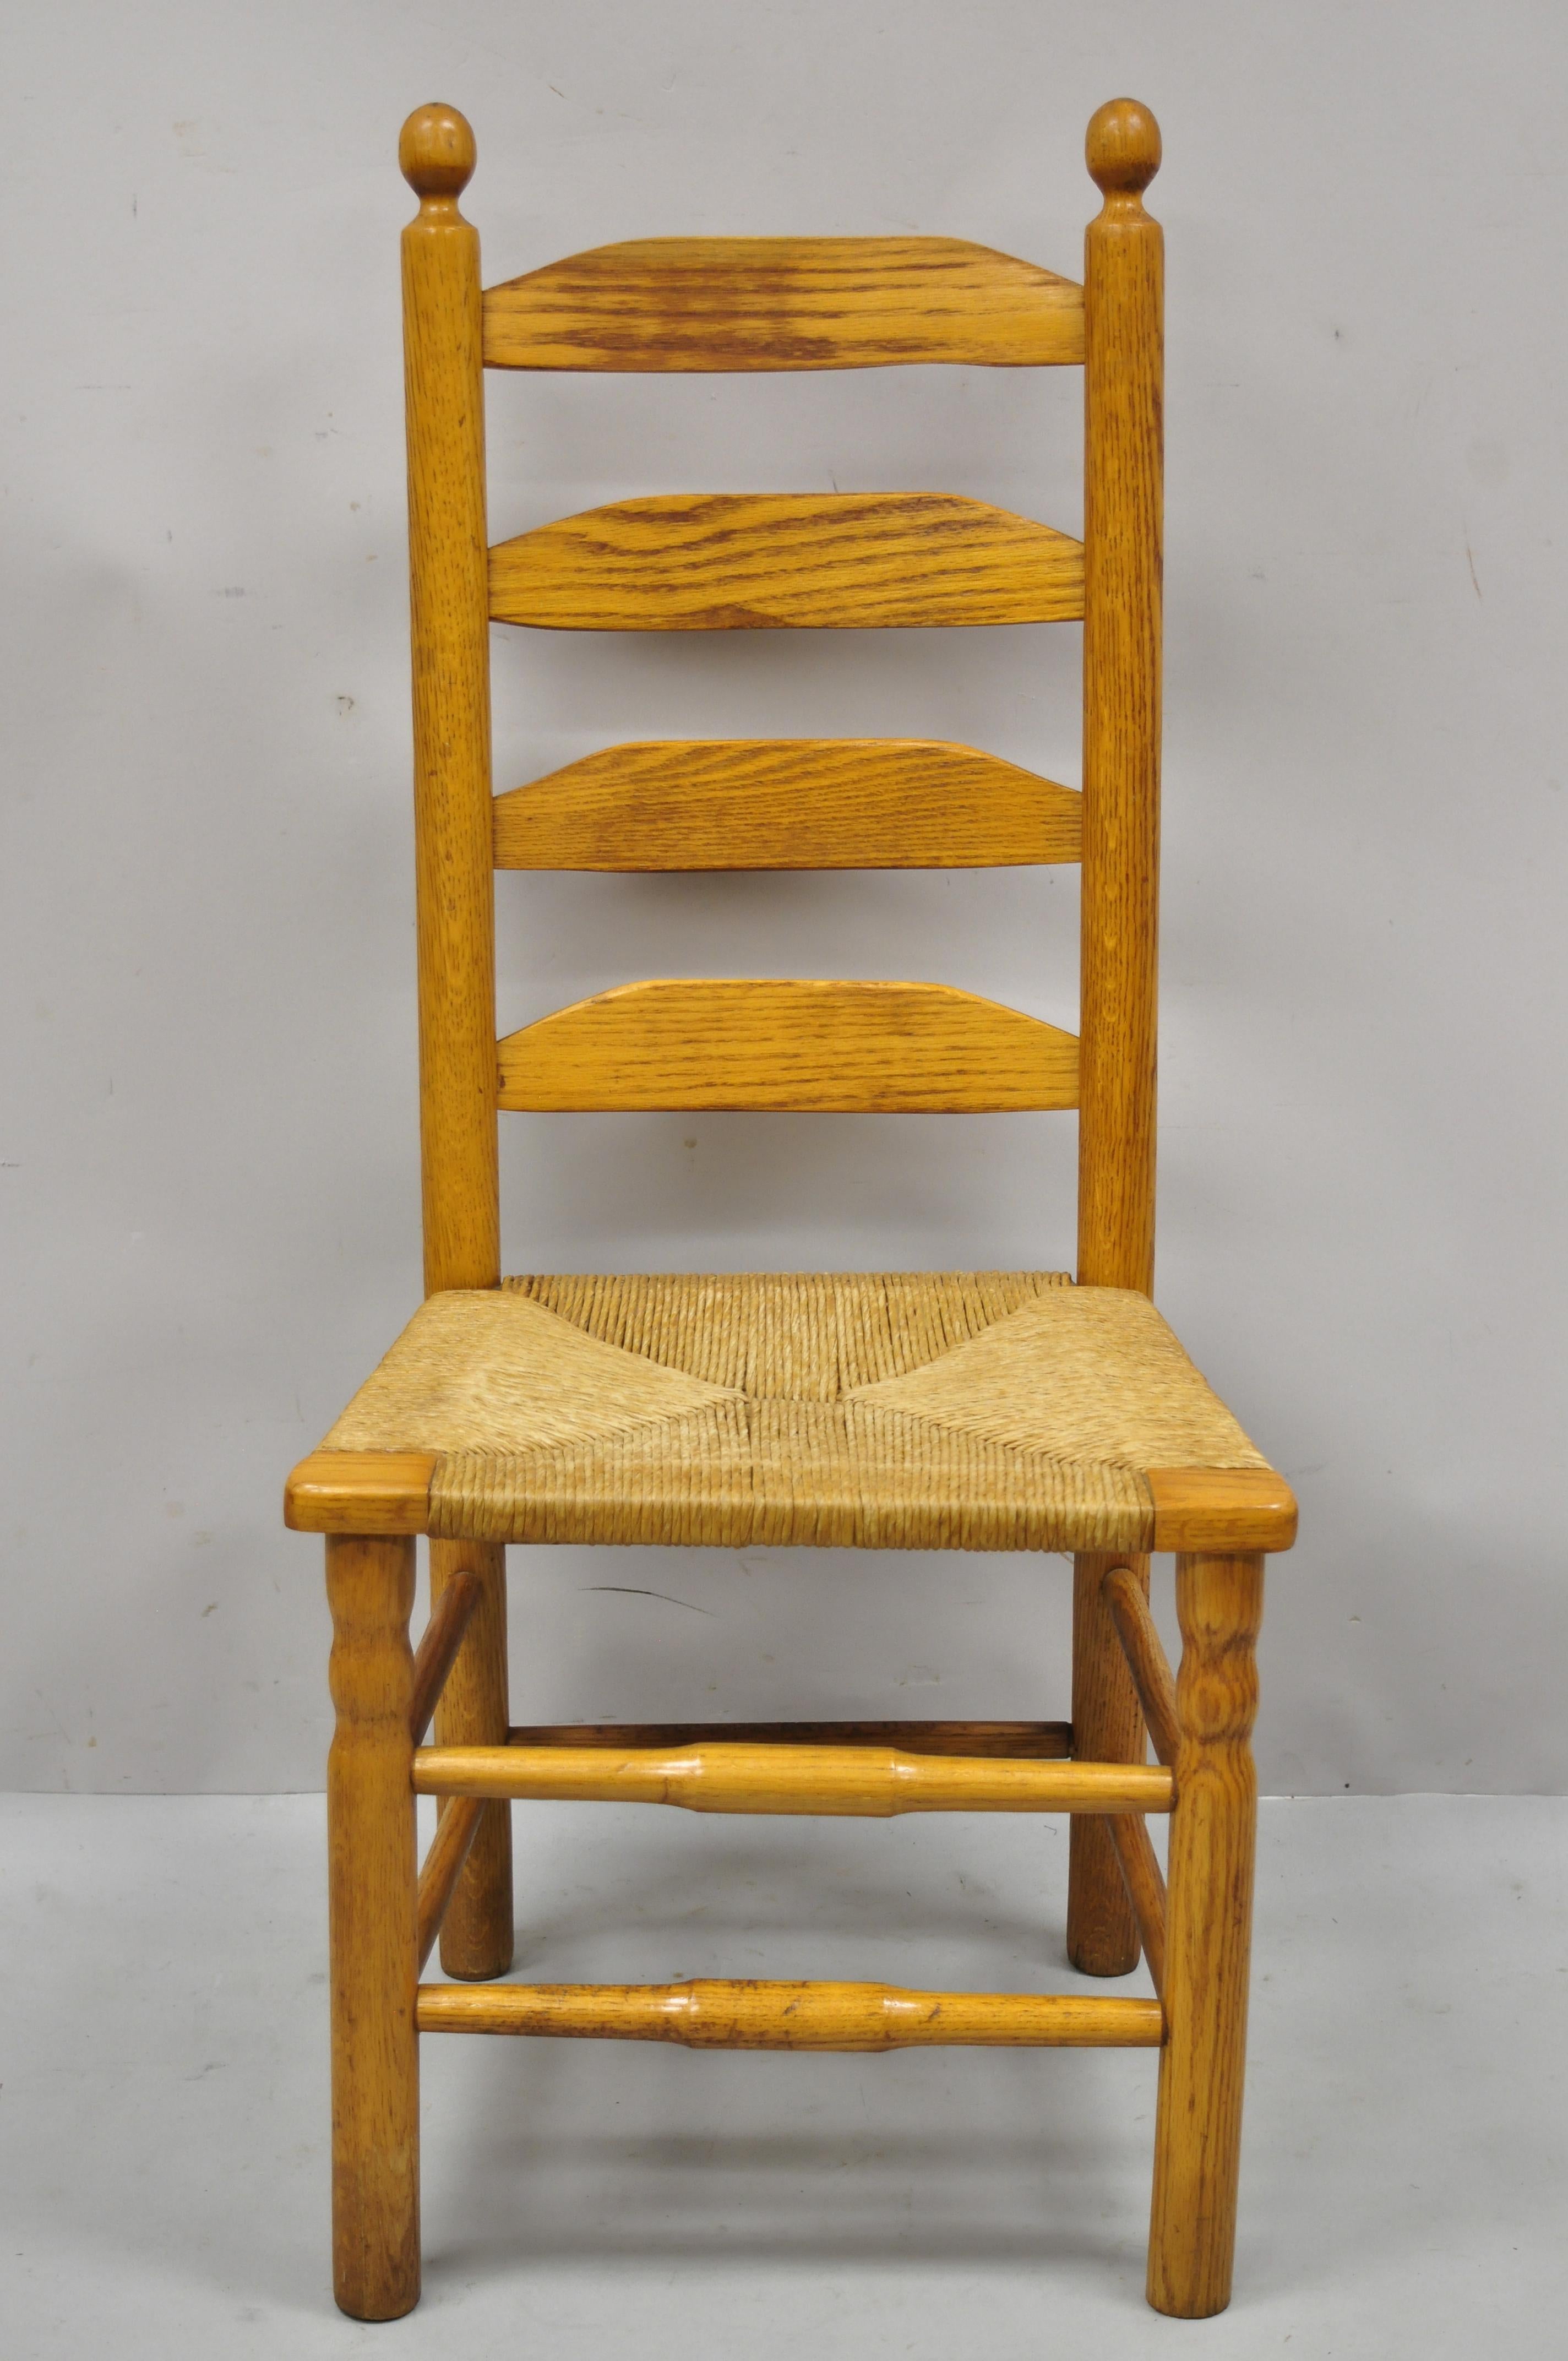 Vintage Oak Wood Rush Seat Tall Ladderback Dining Room Rustic Chairs, Set of 6 5